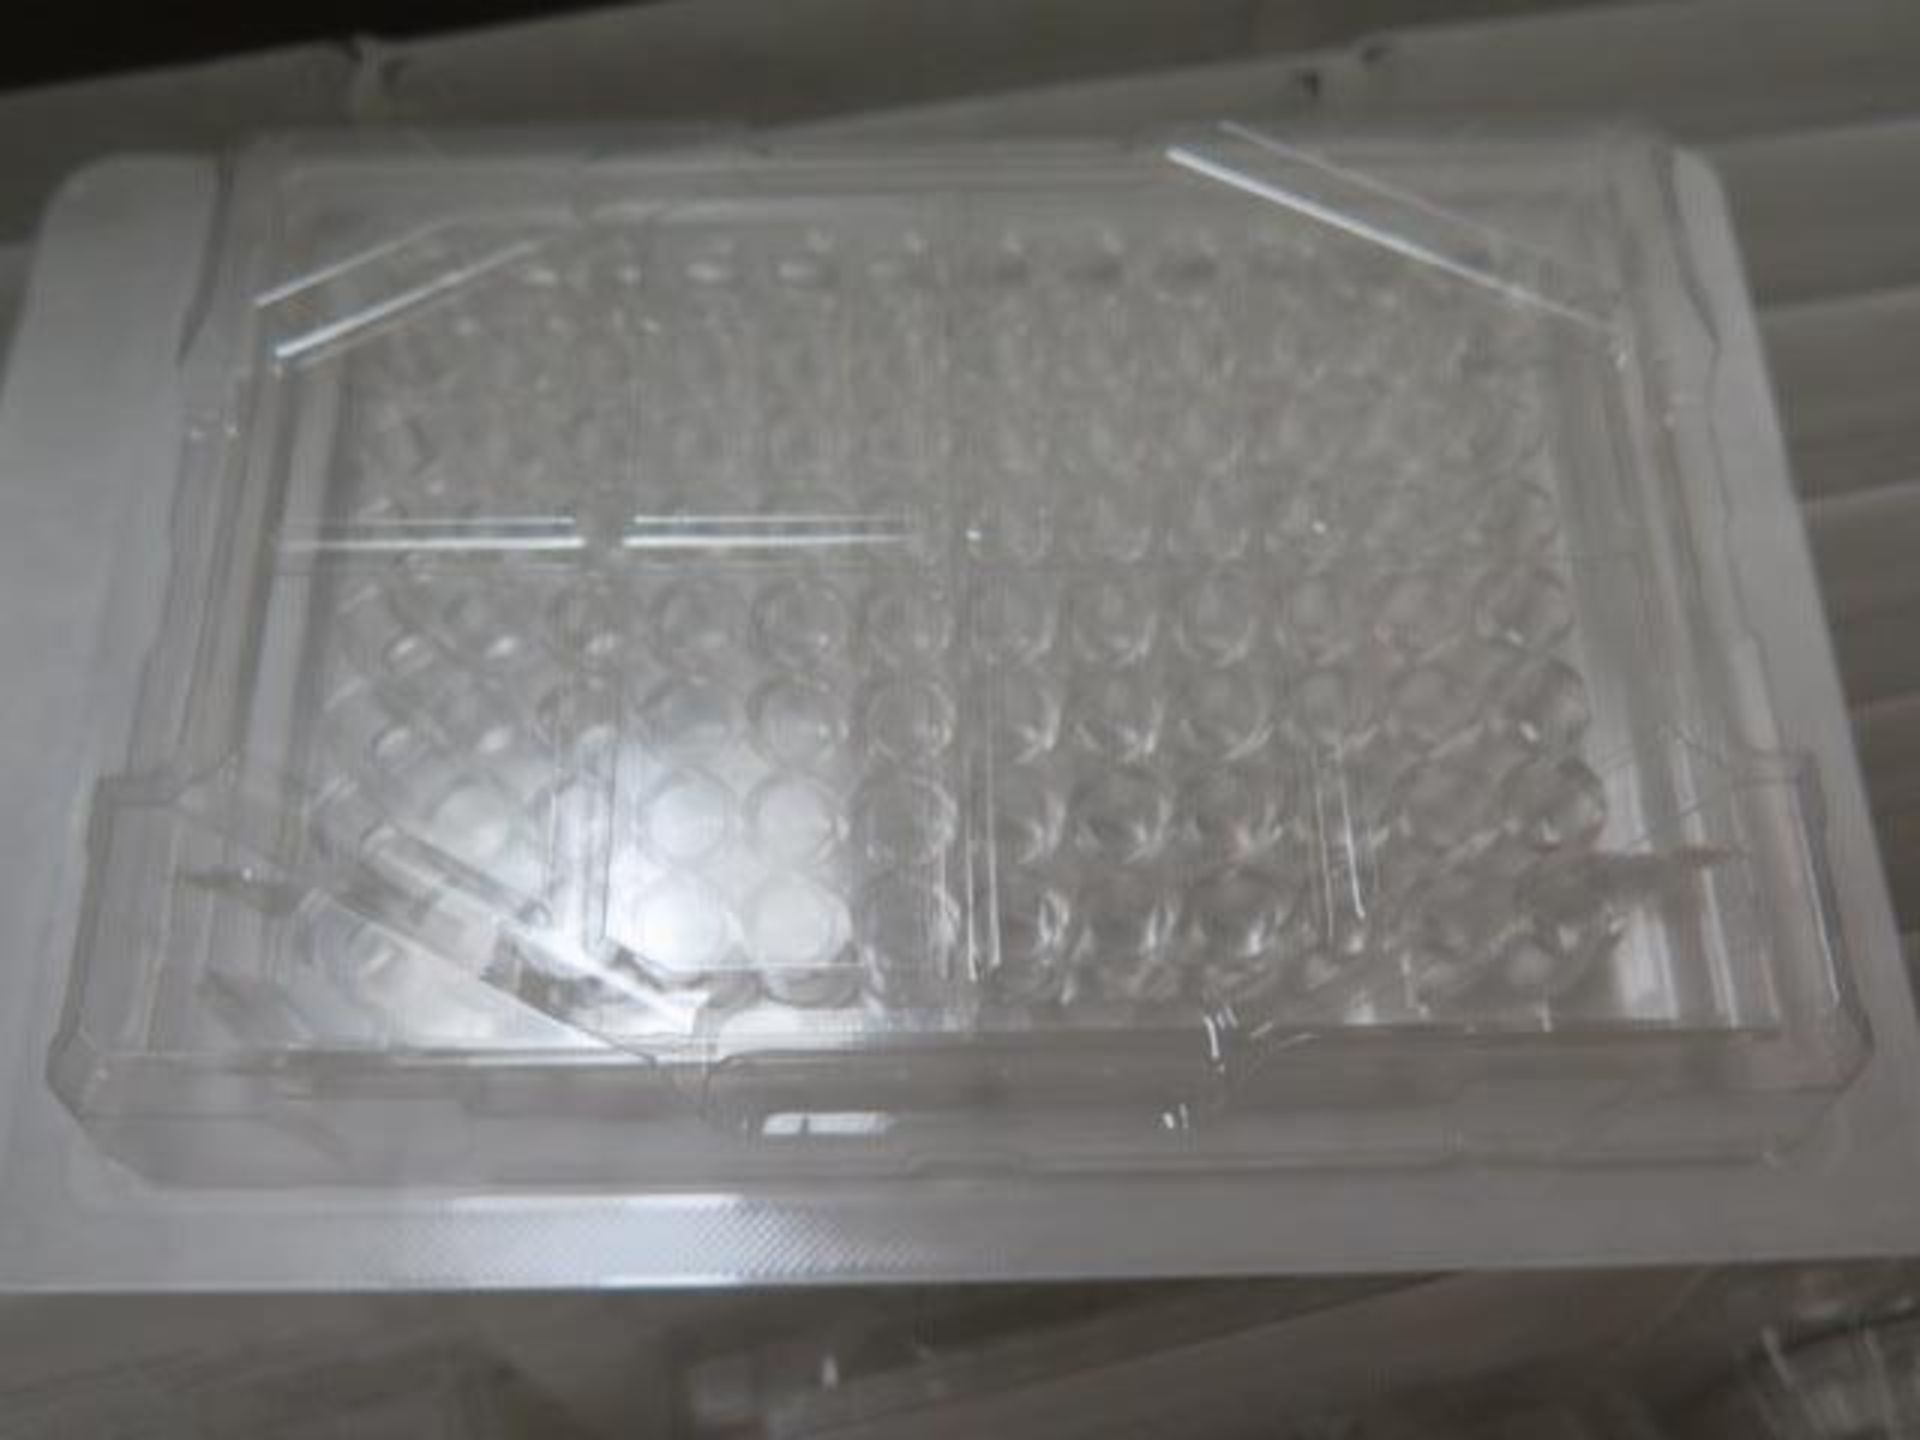 Falcon 96 well Non-Tissue Culture Treated Plates and Nalgene Cryogenic Vials, SOLD AS IS - Image 3 of 6